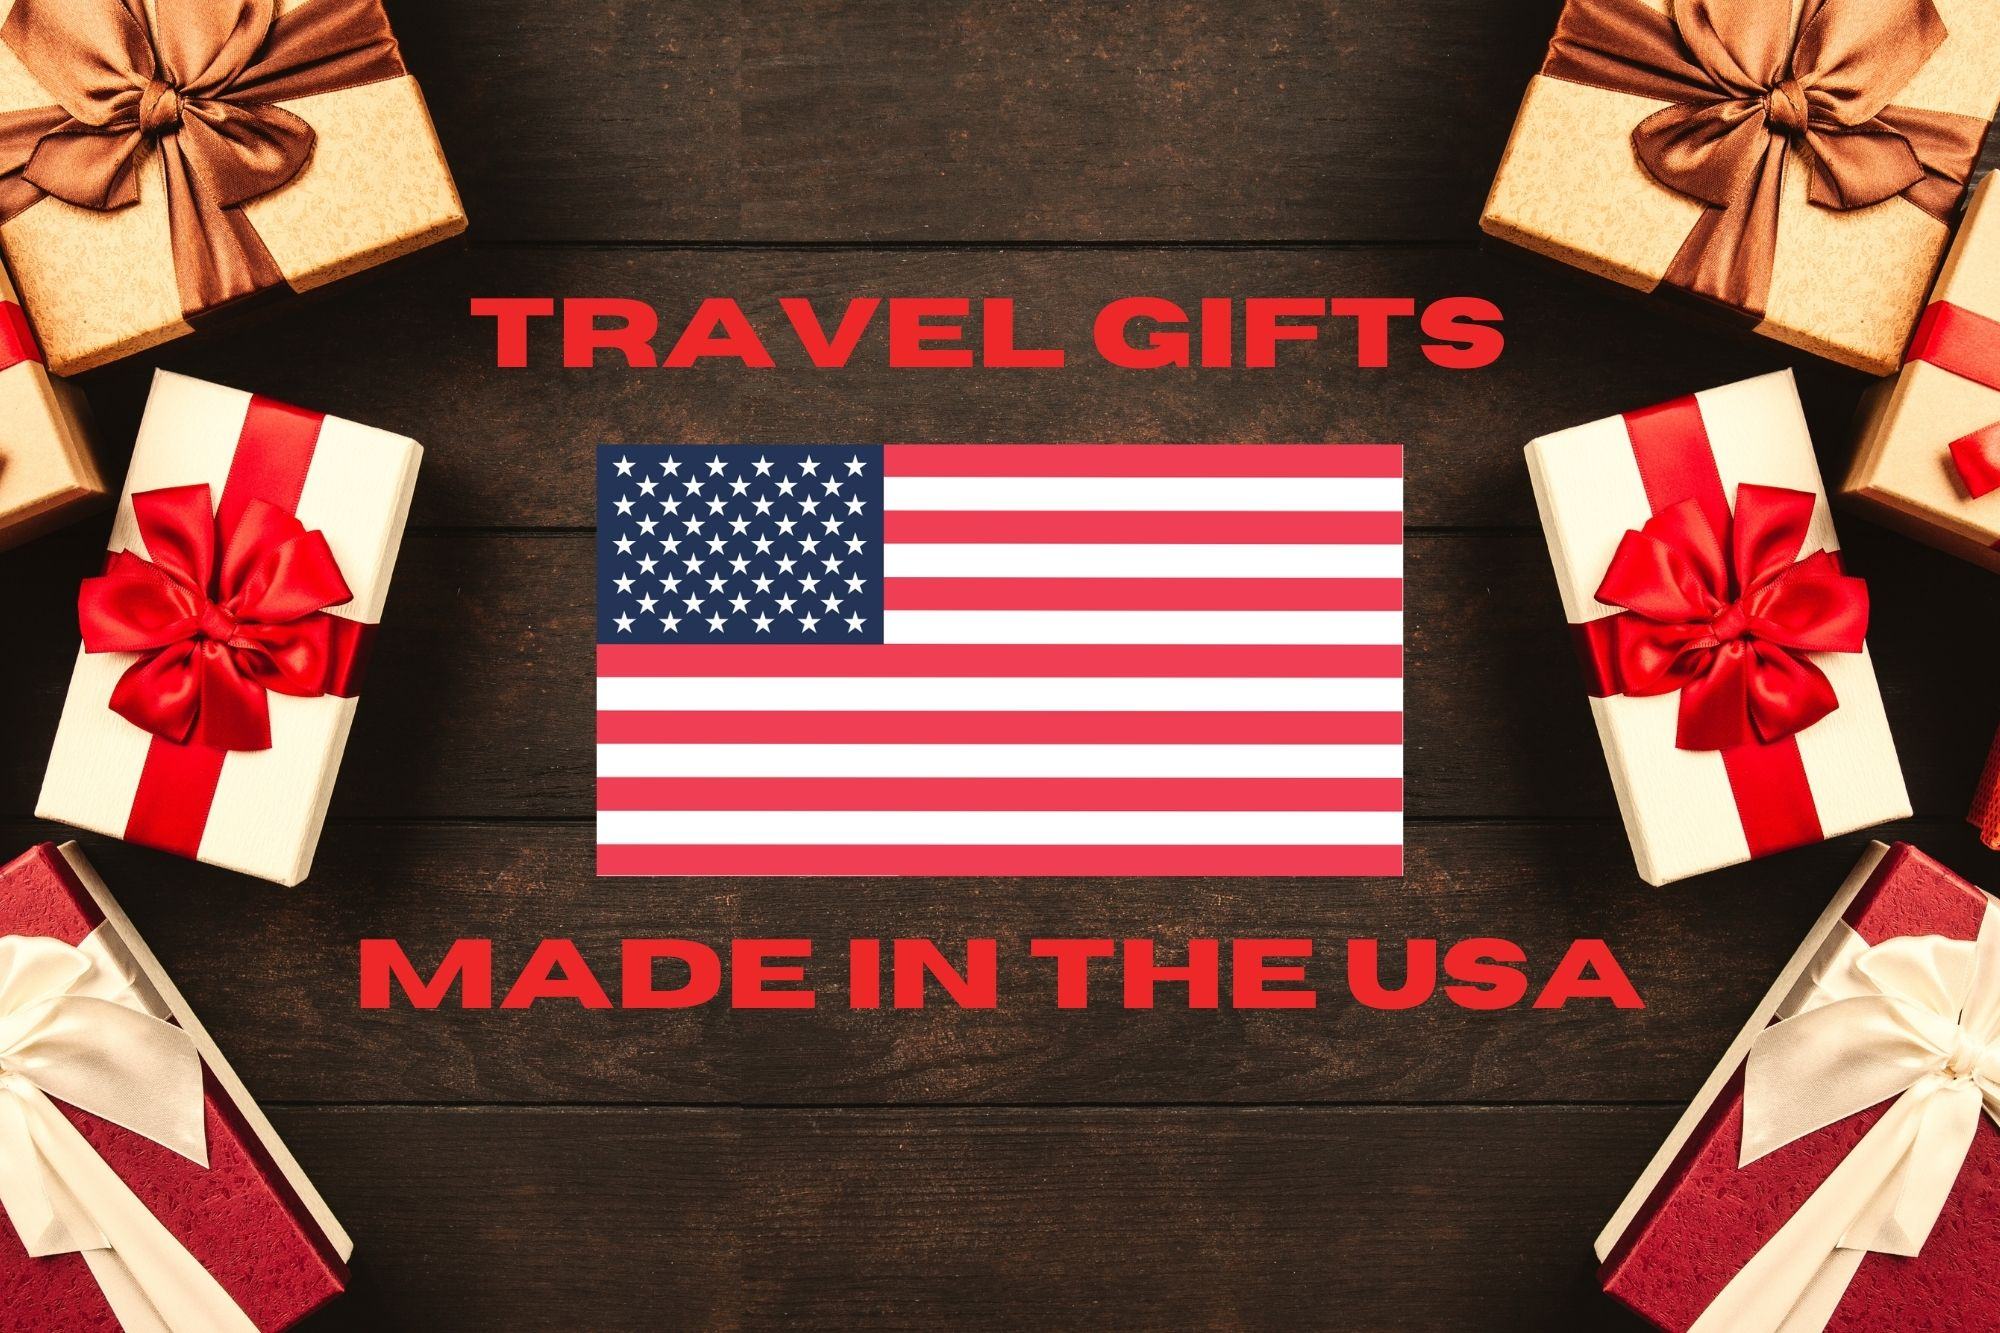 Gifts for Travelers - Travel Gifts Made in the USA